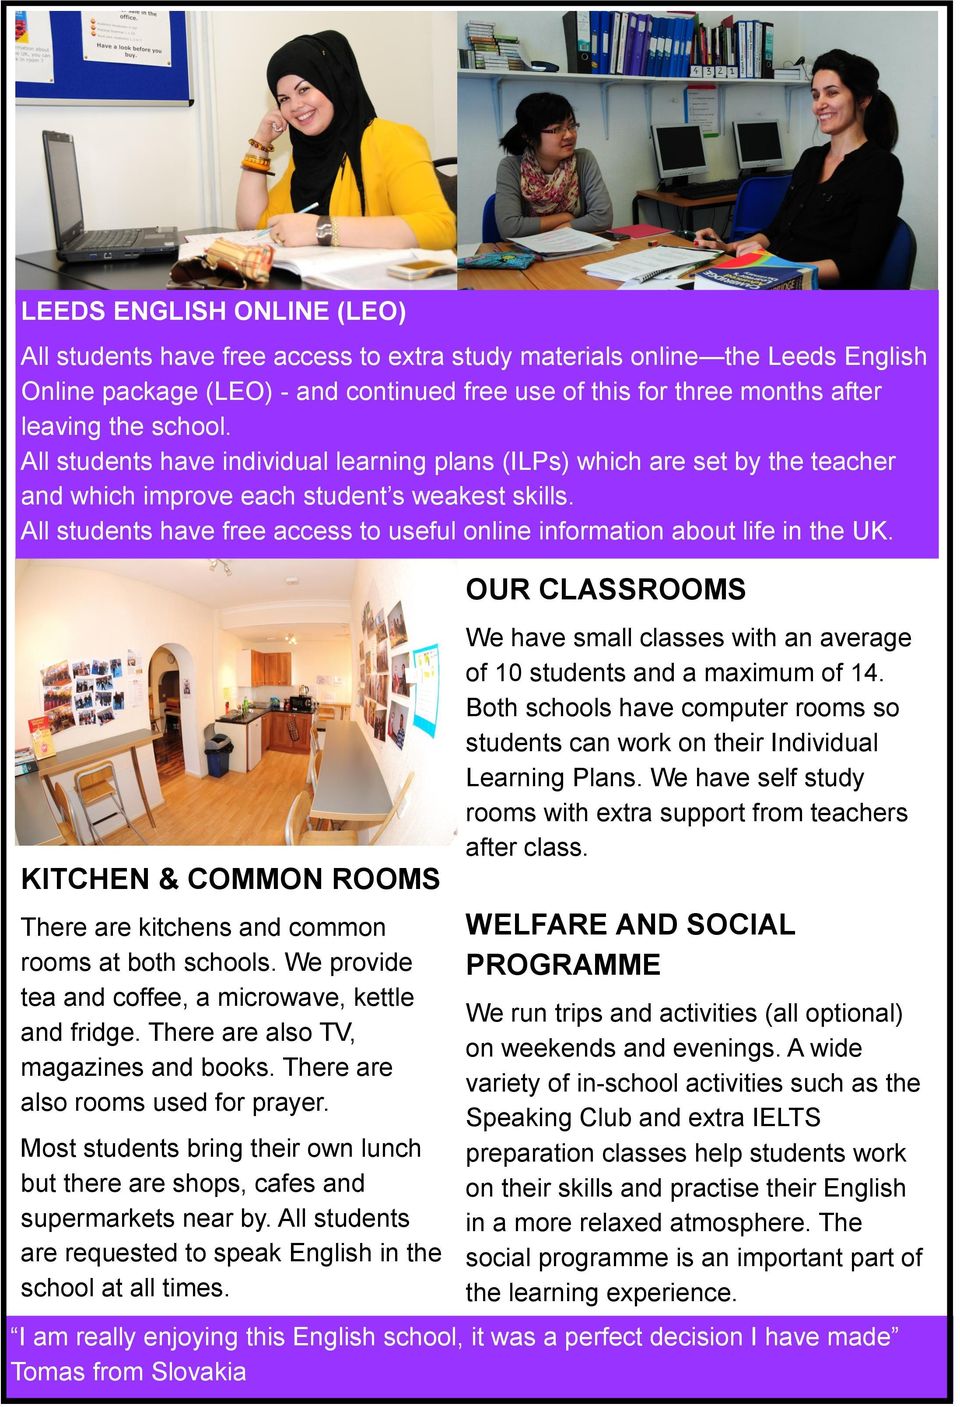 All students have free access to useful online information about life in the UK. KITCHEN & COMMON ROOMS There are kitchens and common rooms at both schools.